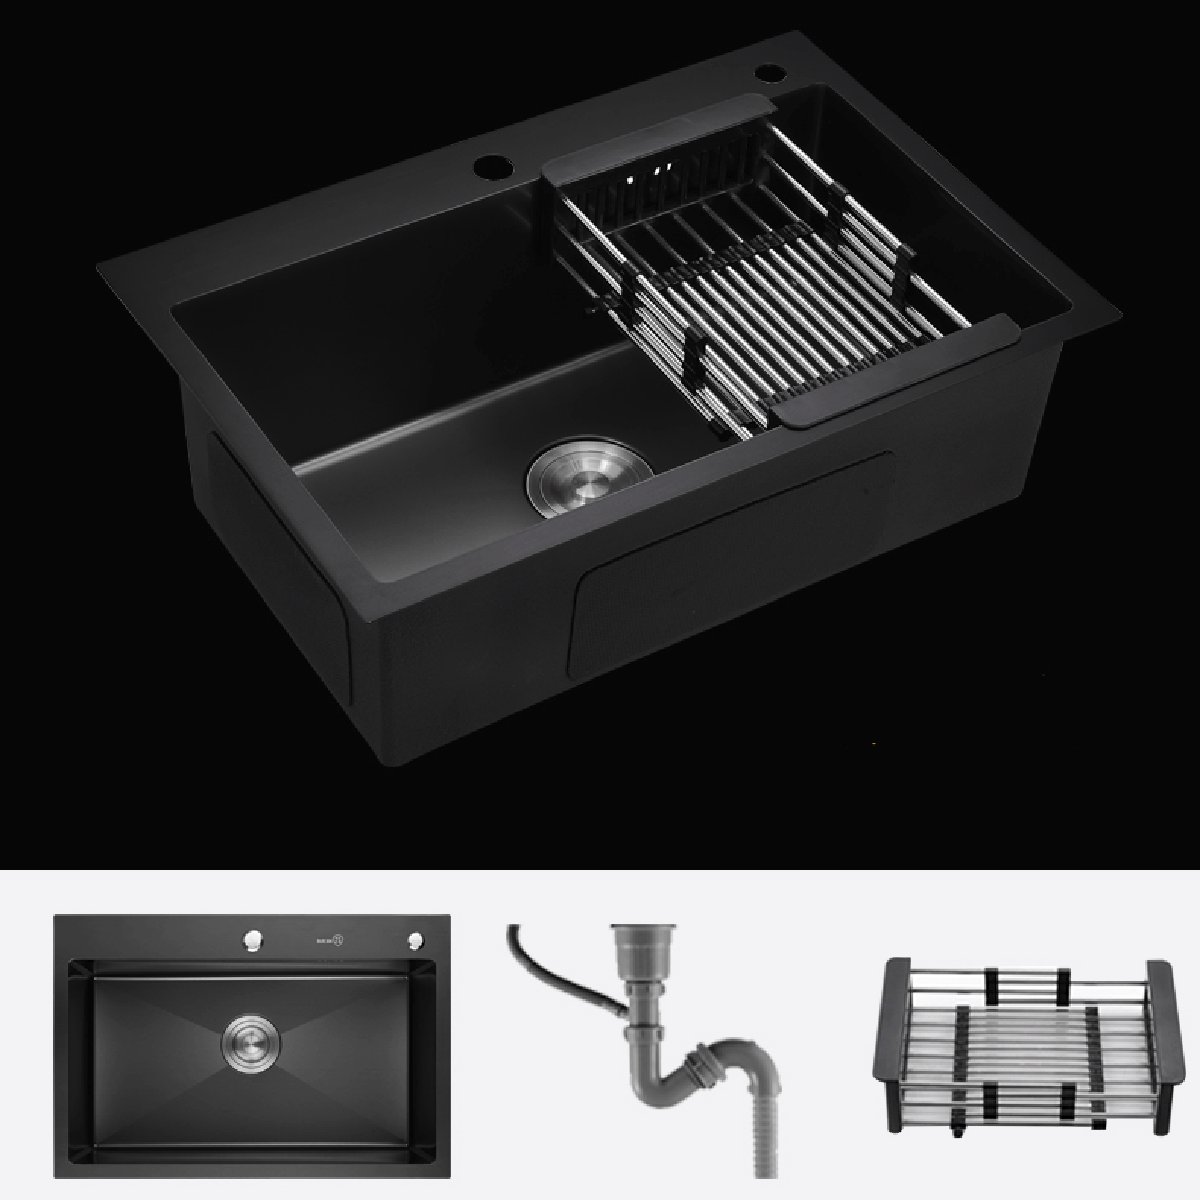 680x450mm-Nano-Stainless-Steel-Kitchen-Black-Sink-Above-Counter-Stainless-Steel-Seamless-Welding-Col-1521101